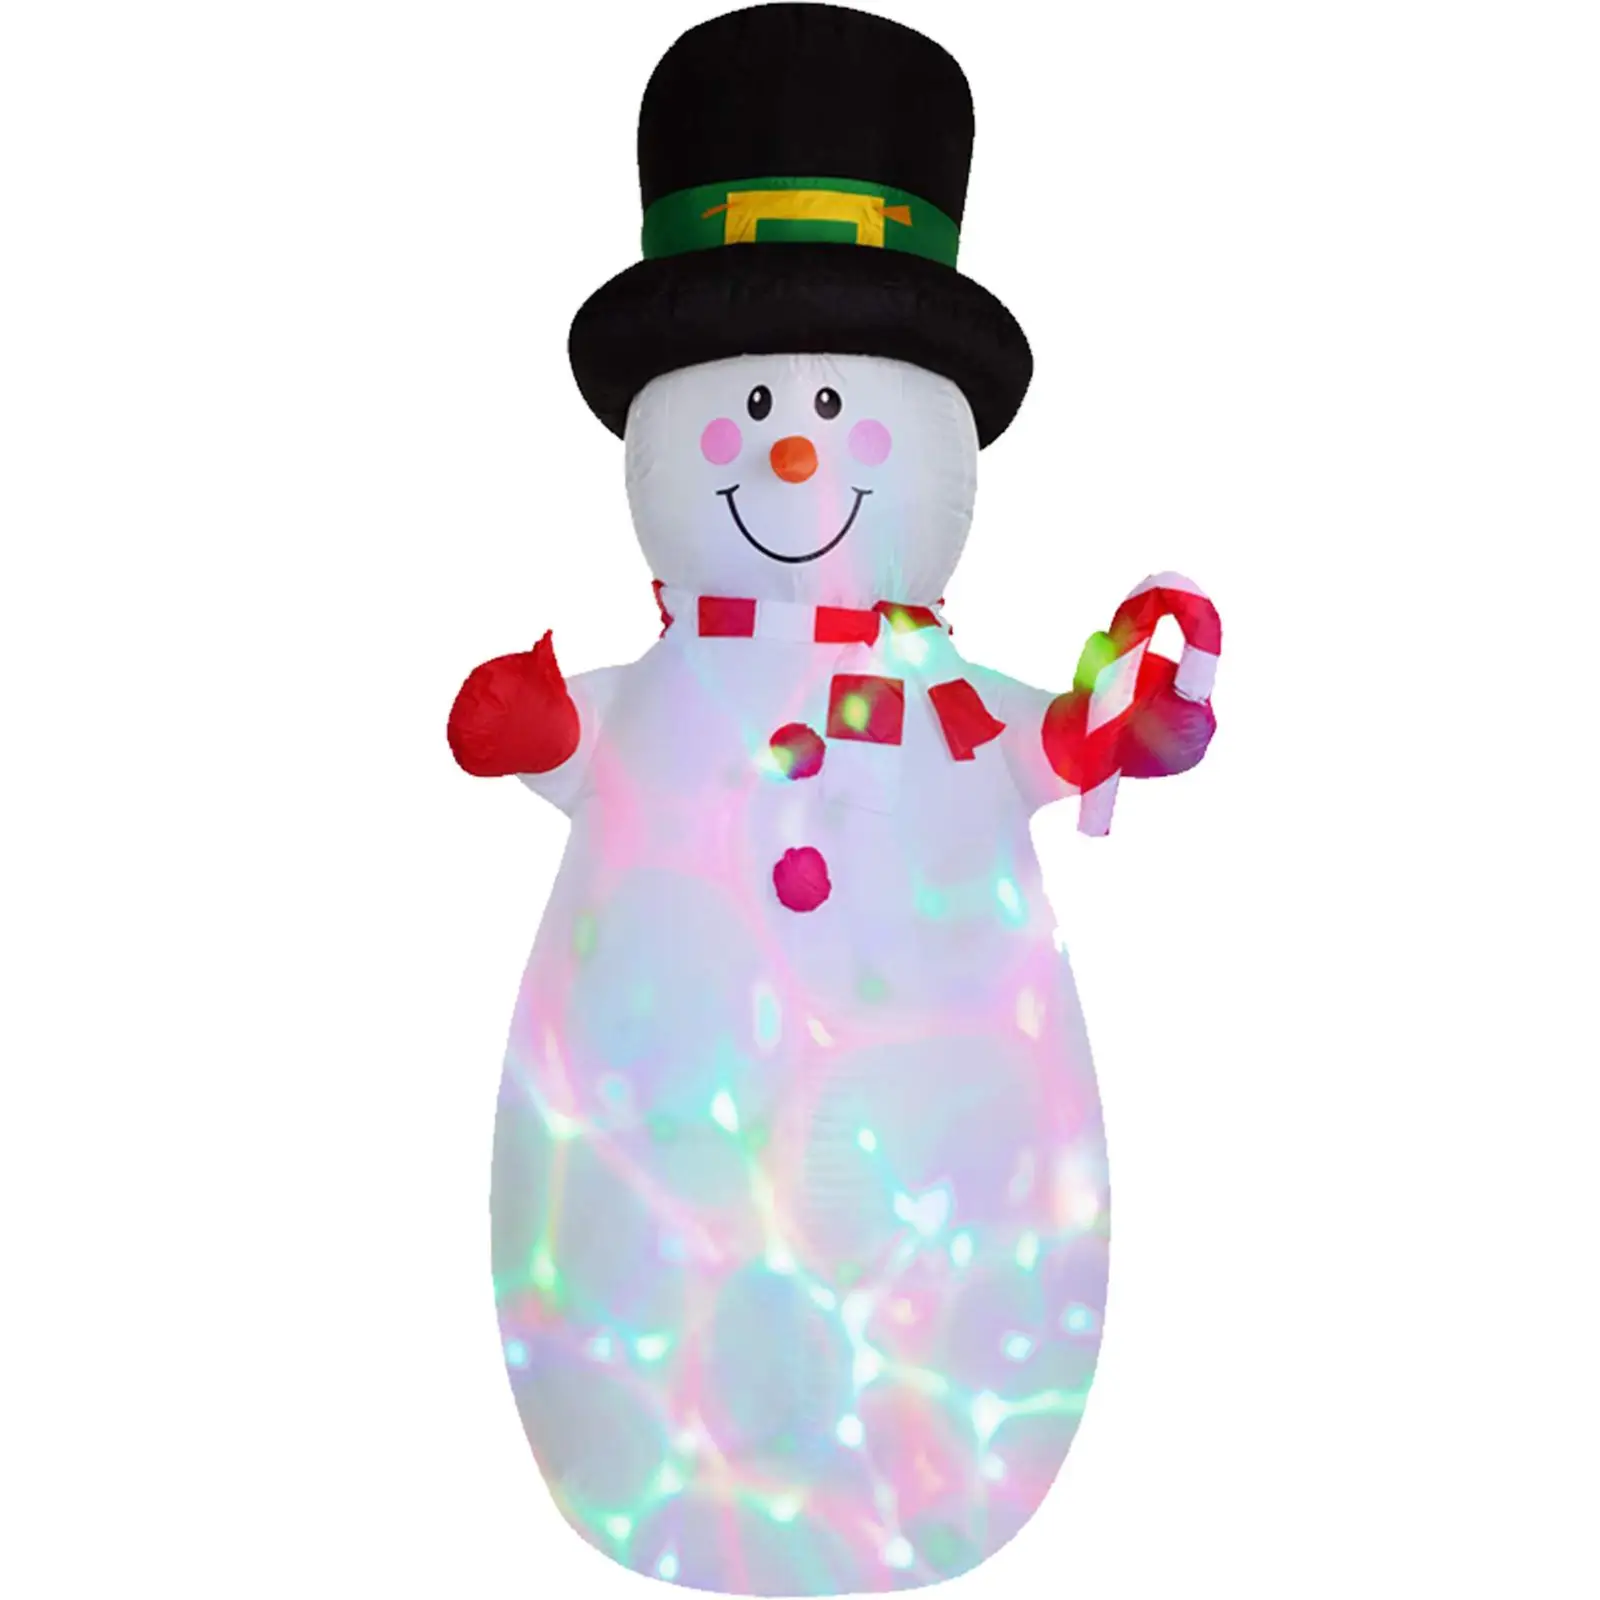 6ft Inflatable Snowman Christmas Decoration for Garden Lawn Outdoor Yard